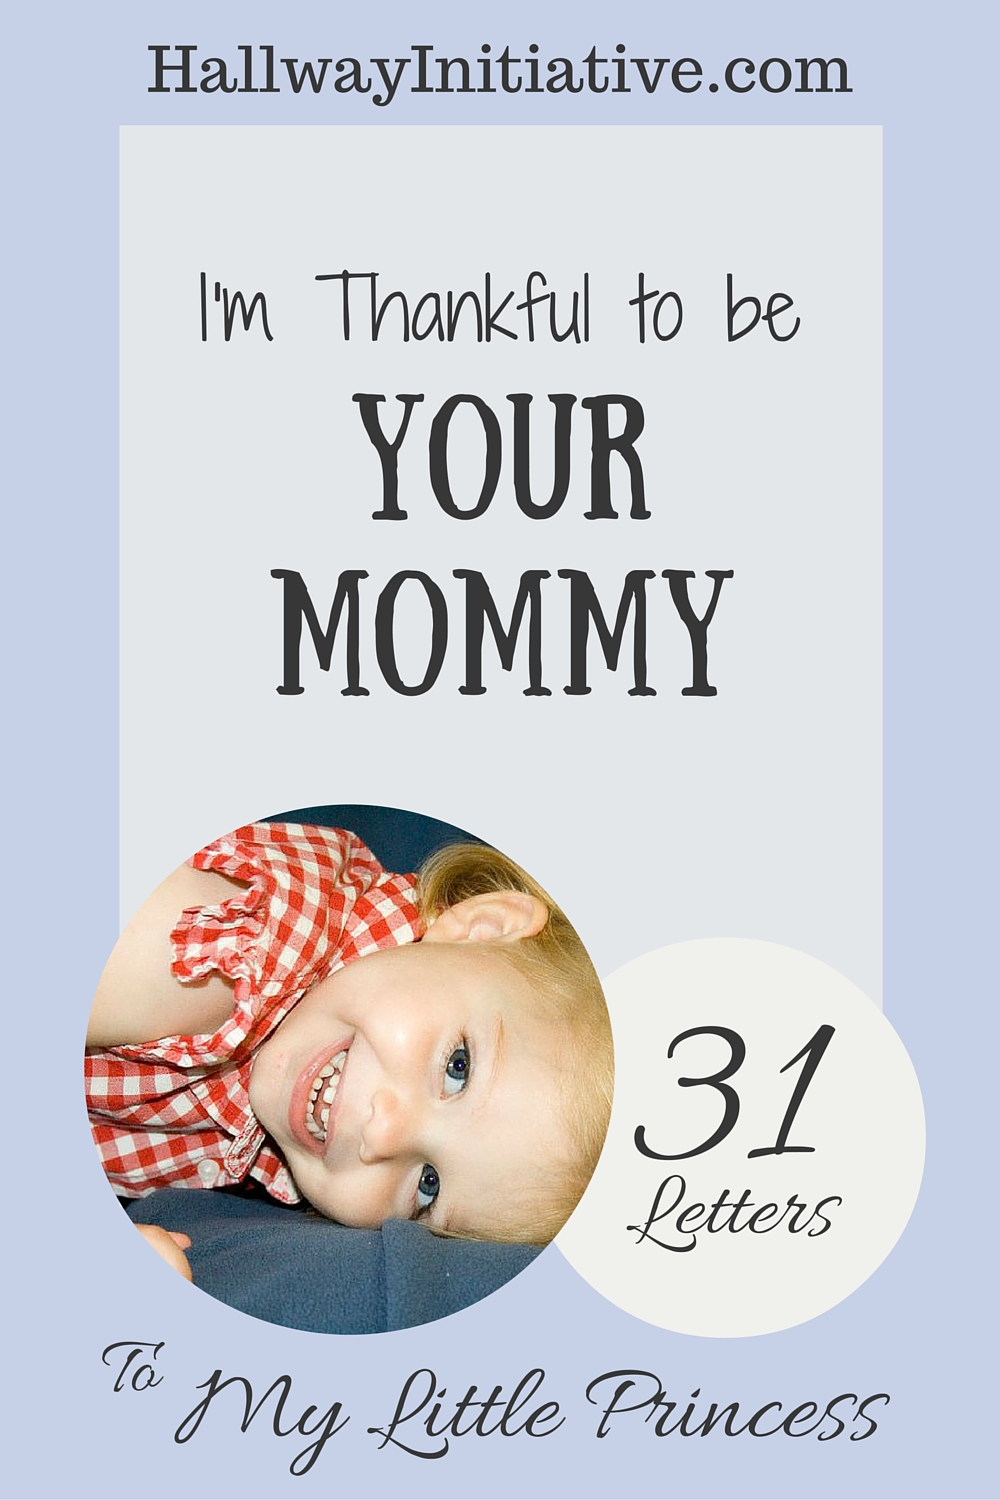 I'm thankful to be your mommy